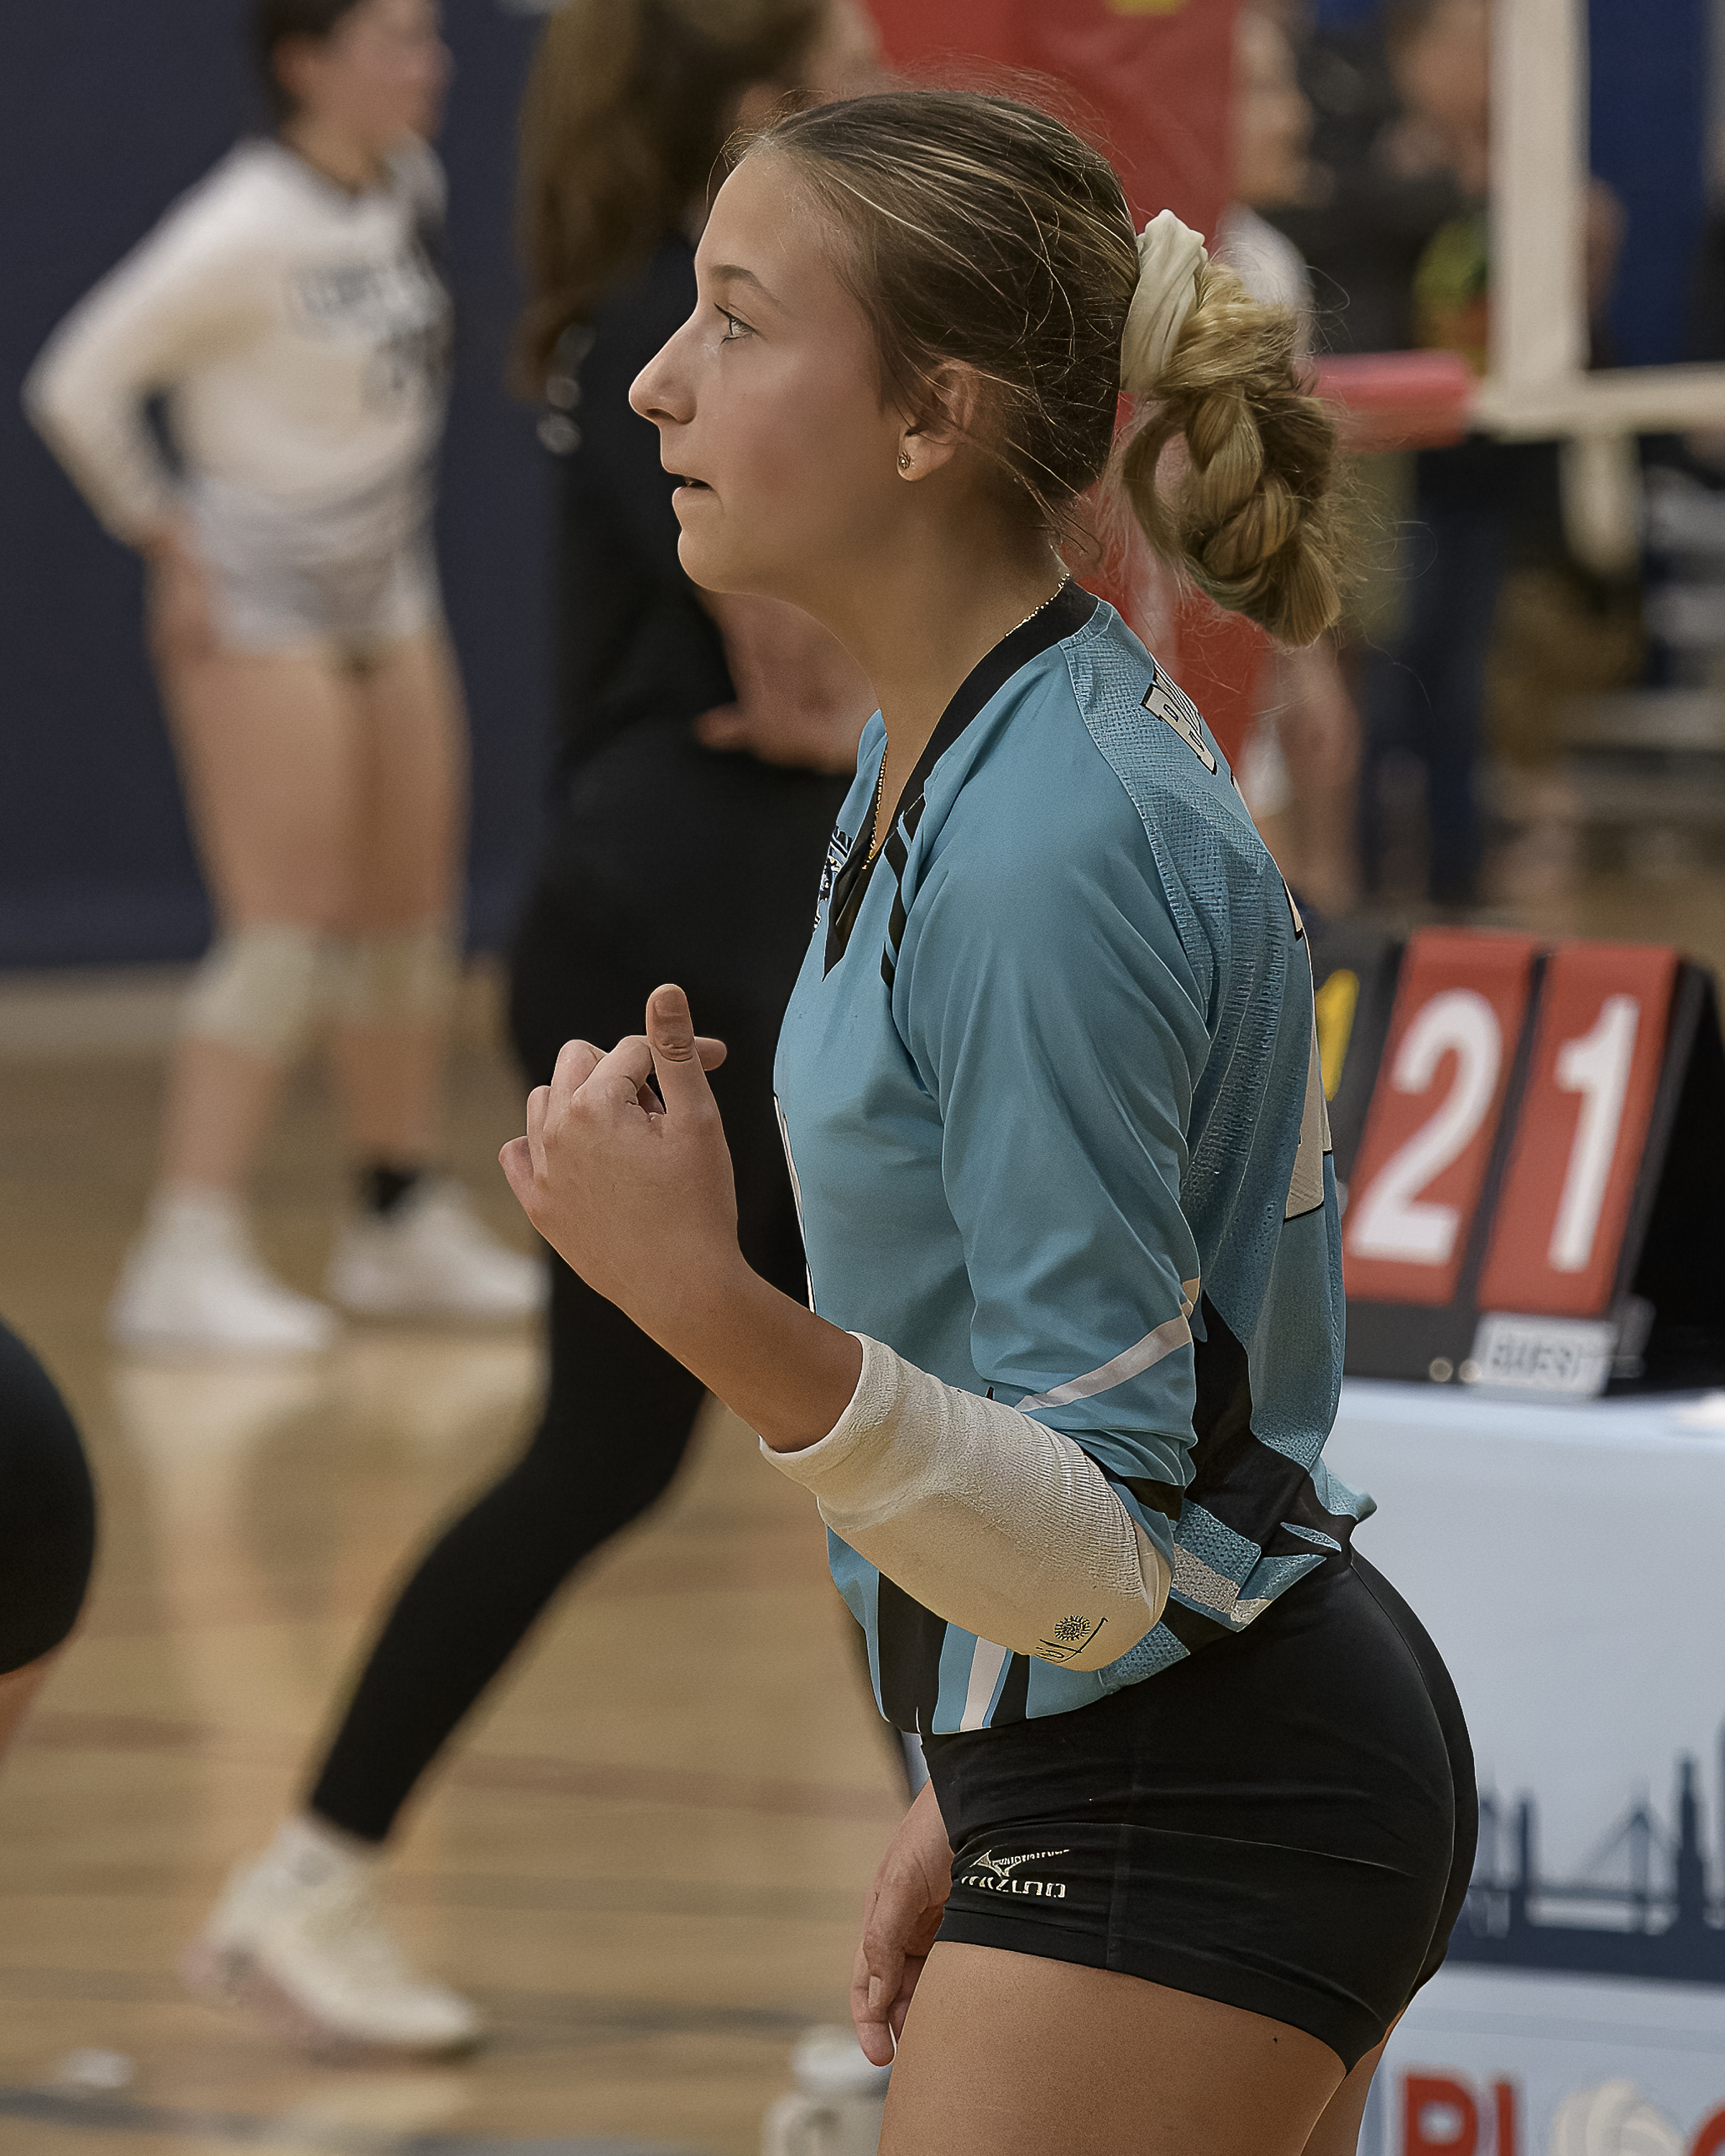 <span class="pn-tooltip pn-player-link">
        <span class="name-pointer">Top-Notch Liberos 16’s Divisions – Gasparilla Volleyball Kickoff</span>
        <span class="info-box not-prose" style="background: linear-gradient(to bottom, rgba(23,90,170, 0.95) 0%,rgba(23,90,170, 1) 100%)">
            <a href="https://prepdig.com/2024/02/top-notch-liberos-16s-divisions-gasparilla-volleyball-kickoff/" class="link-wrap">
                                    <span class="player-img"><img src="https://prepdig.com/wp-content/uploads/sites/5/2024/02/Hannah-Grassin2-crop-2044x1342-1708486361.jpg?w=150&h=150&crop=1" alt="Top-Notch Liberos 16’s Divisions – Gasparilla Volleyball Kickoff"></span>
                
                <span class="player-details">
                    <span class="first-name">Top-Notch</span>
                    <span class="last-name">Liberos 16’s Divisions – Gasparilla Volleyball Kickoff</span>
                    <span class="measurables">
                                            </span>
                                    </span>
                <span class="player-rank">
                                                        </span>
                                    <span class="state-abbr"></span>
                            </a>

            
        </span>
    </span>
